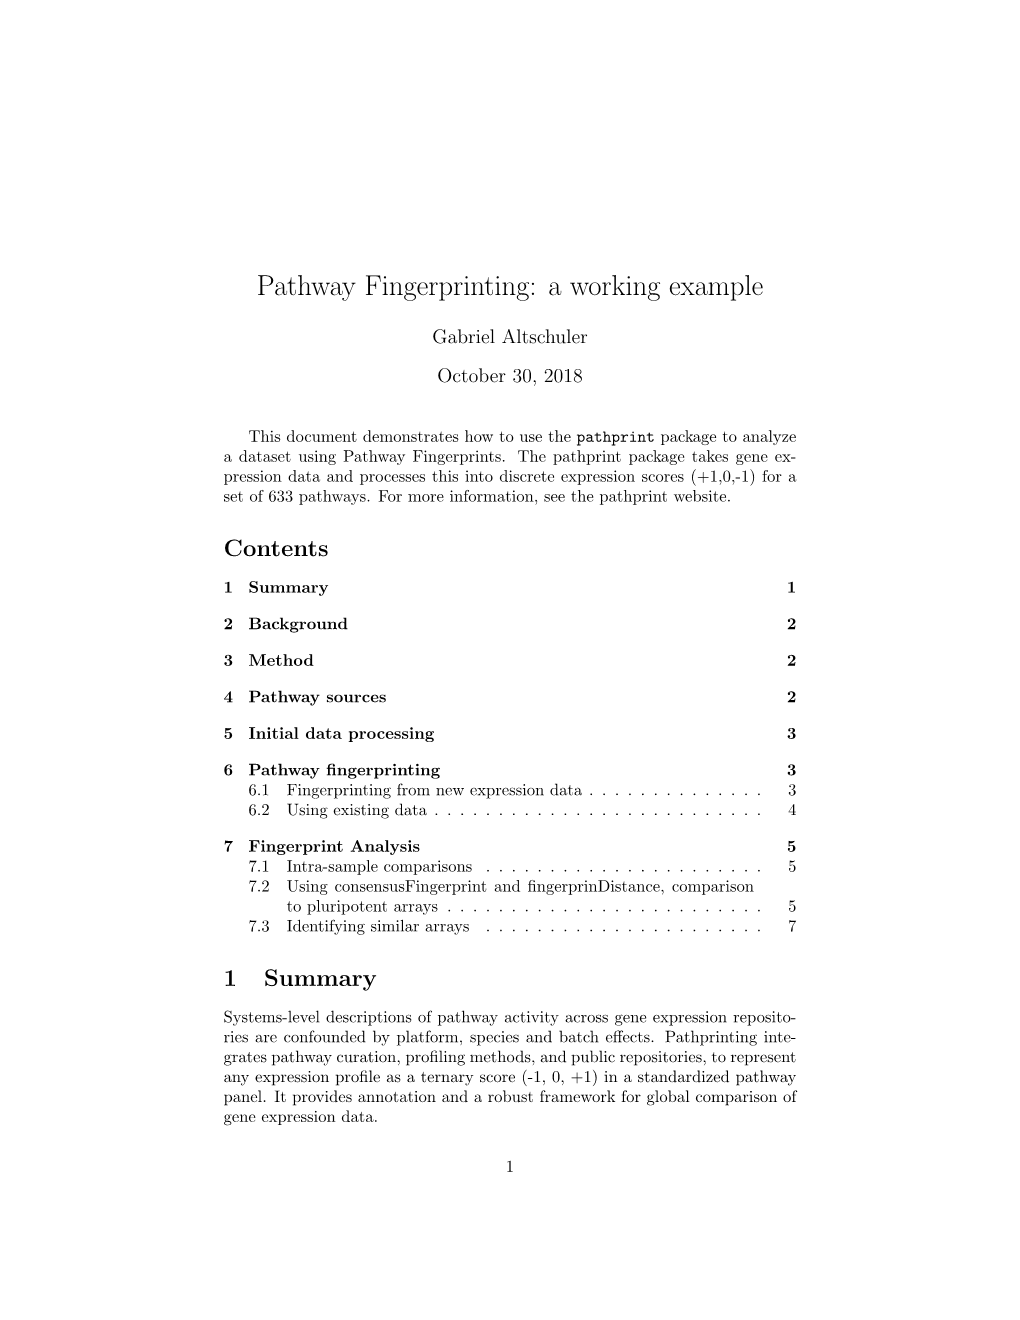 Pathway Fingerprinting: a Working Example